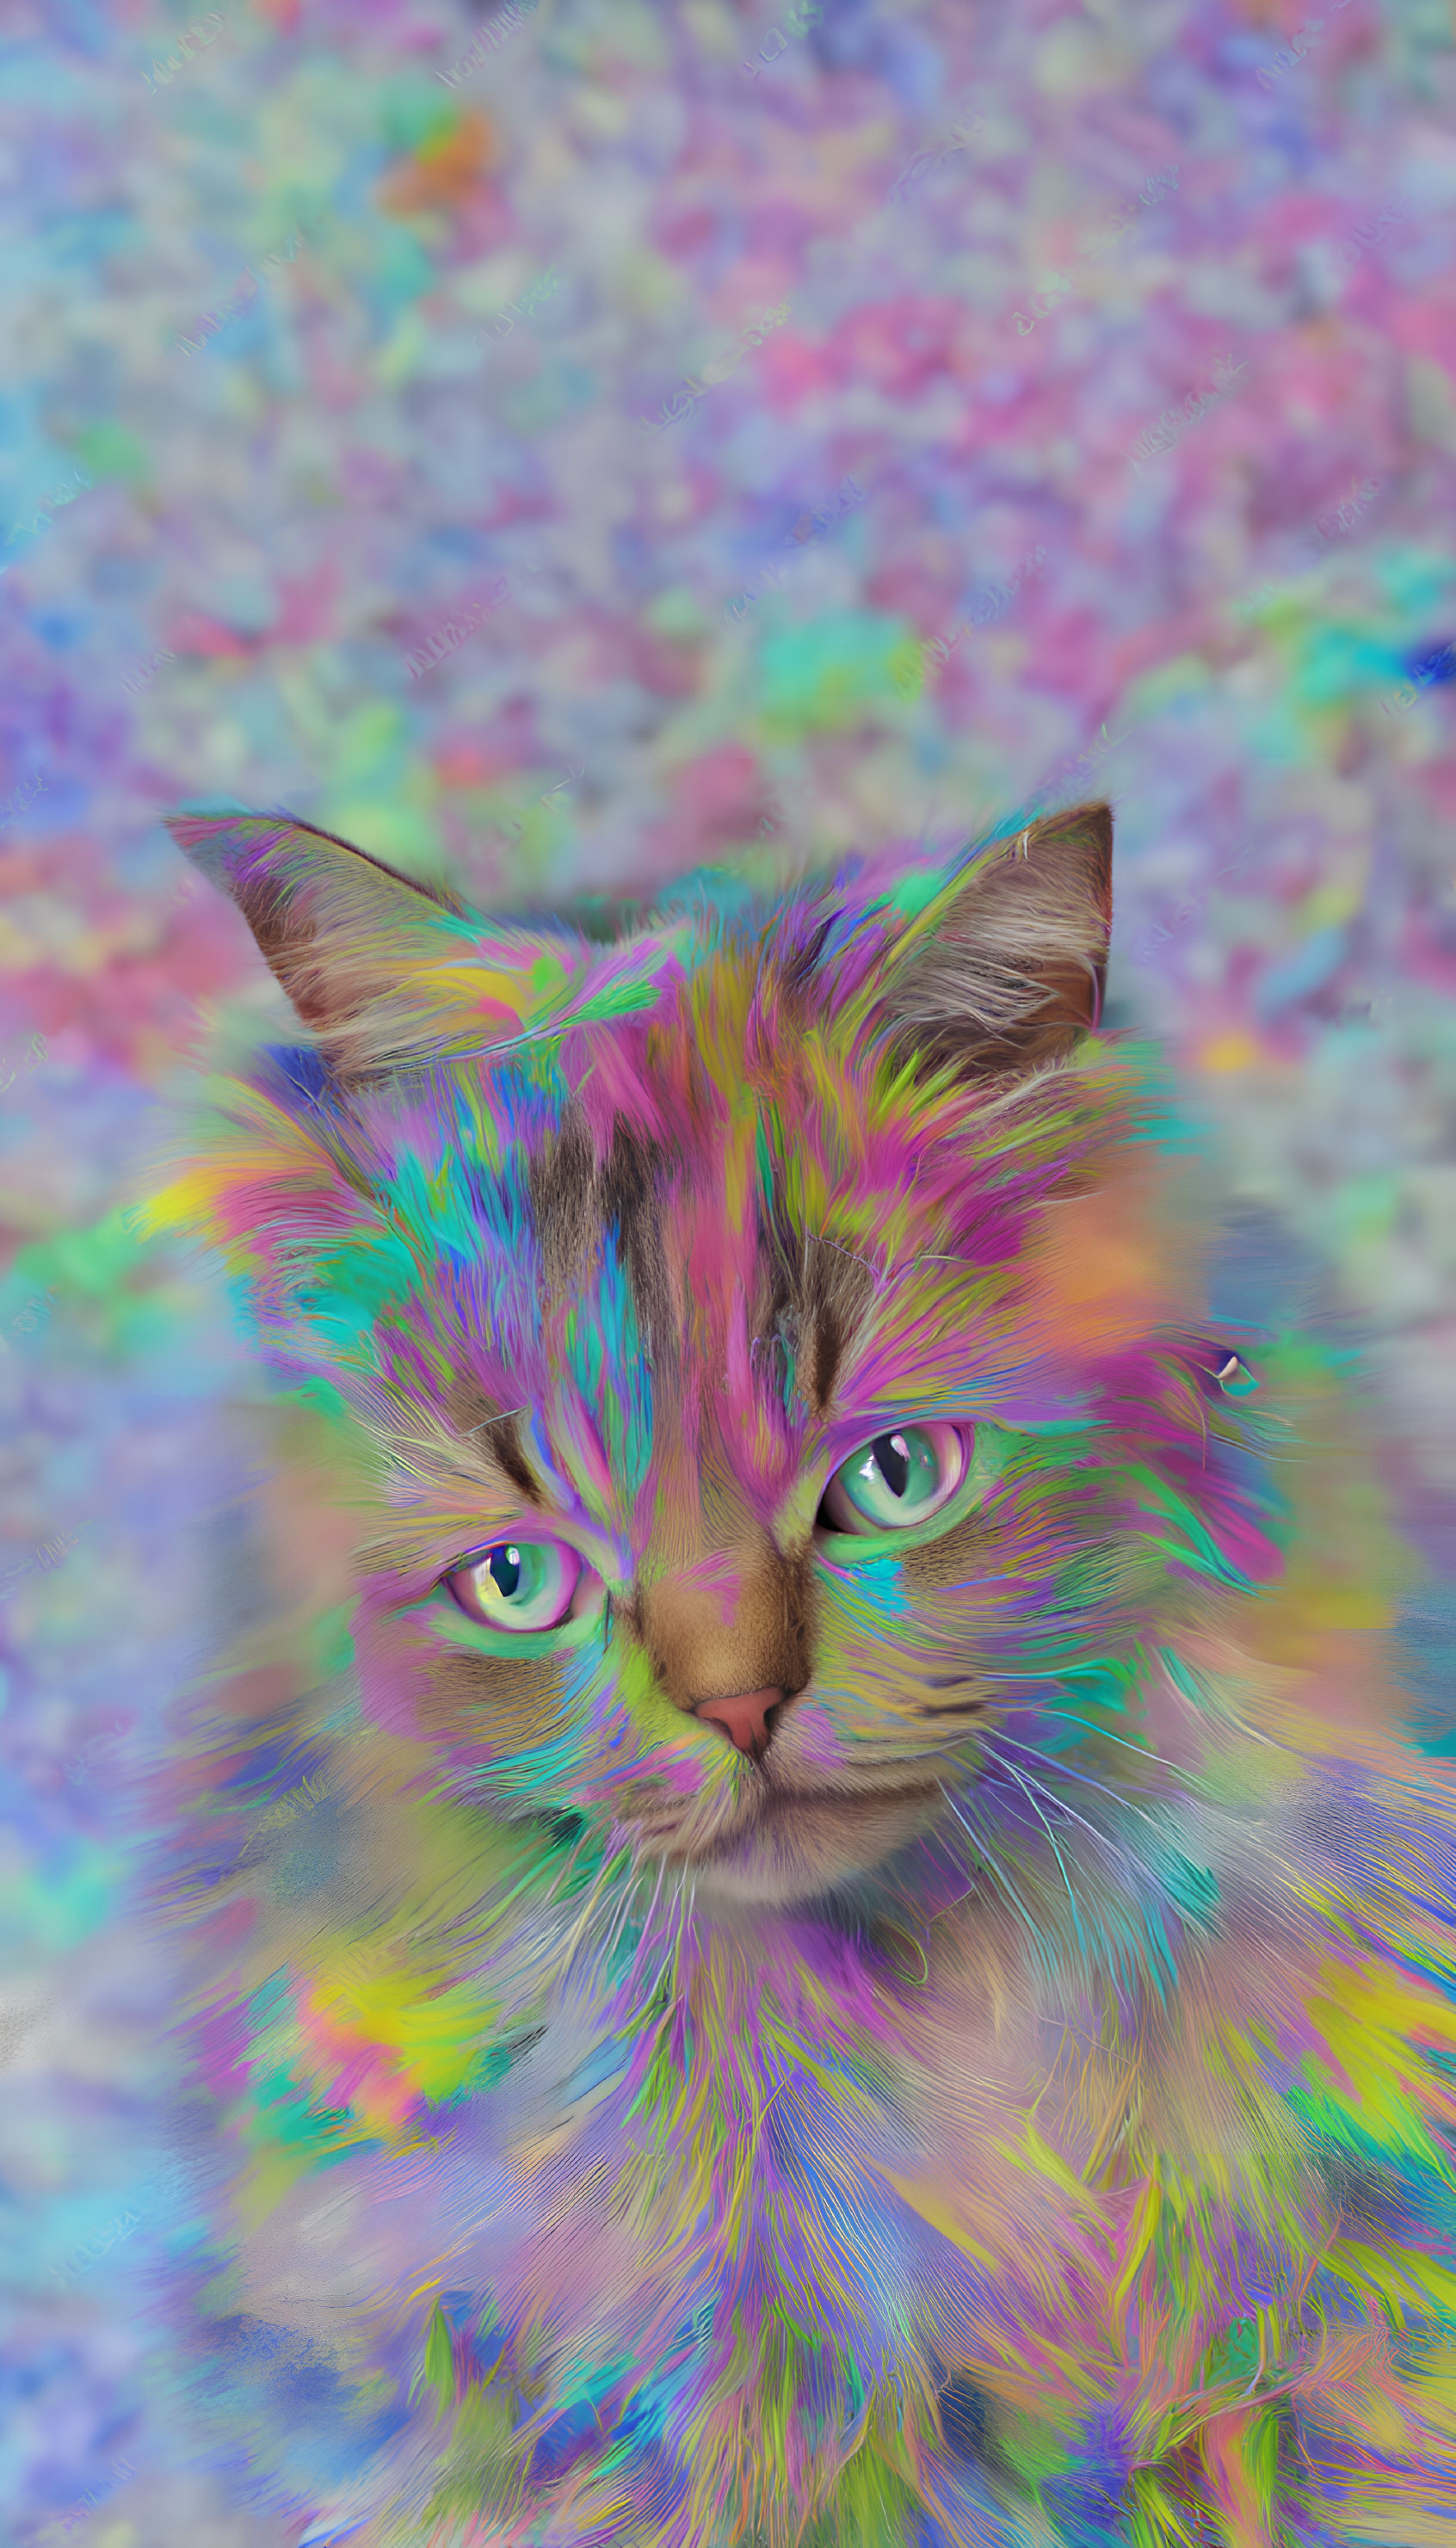 Multicolored cat with pink, blue, and green fur and intense green eyes